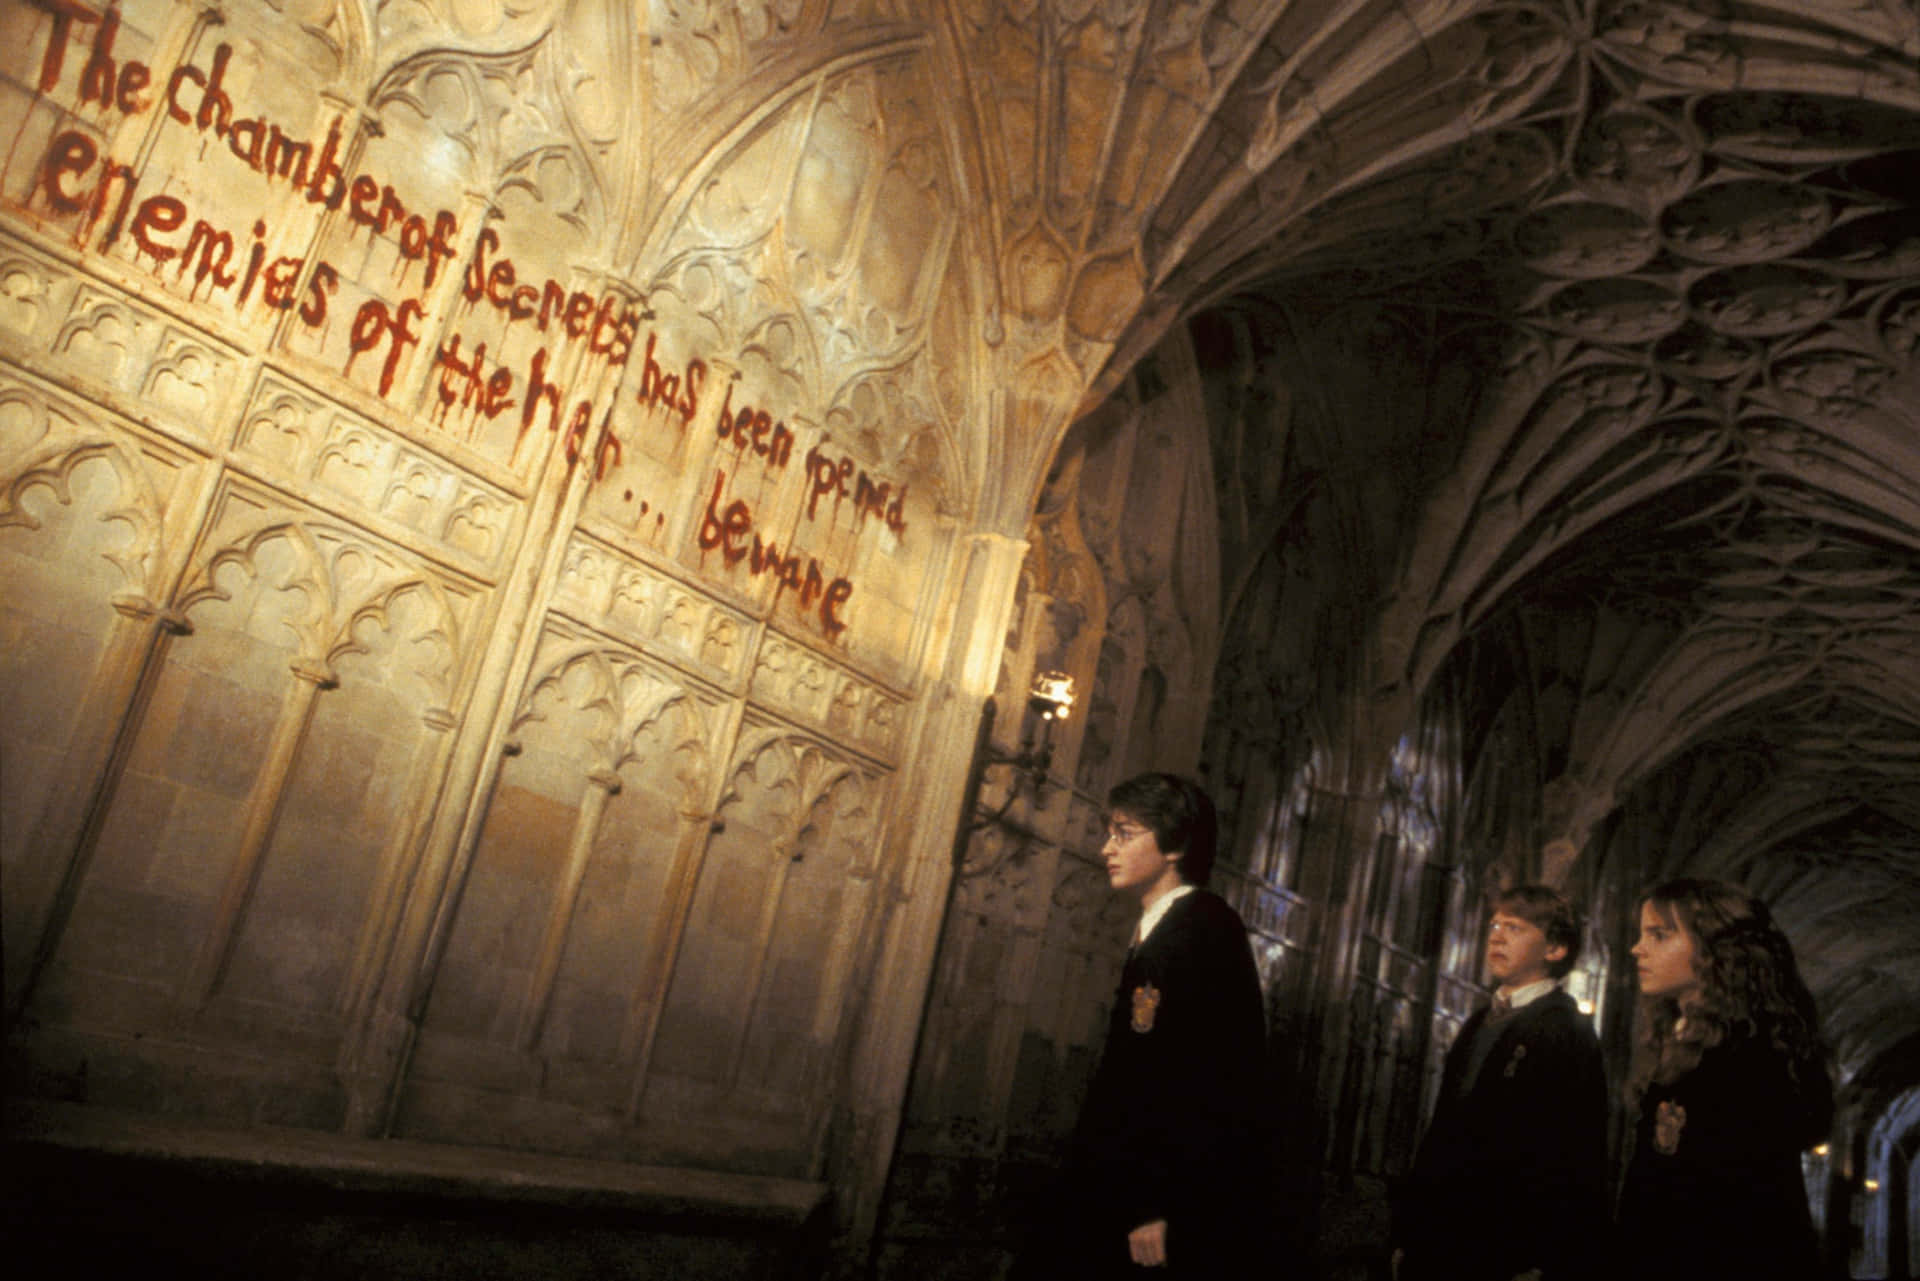 Visit the mysterious Chamber of Secrets and explore what lies beyond Wallpaper